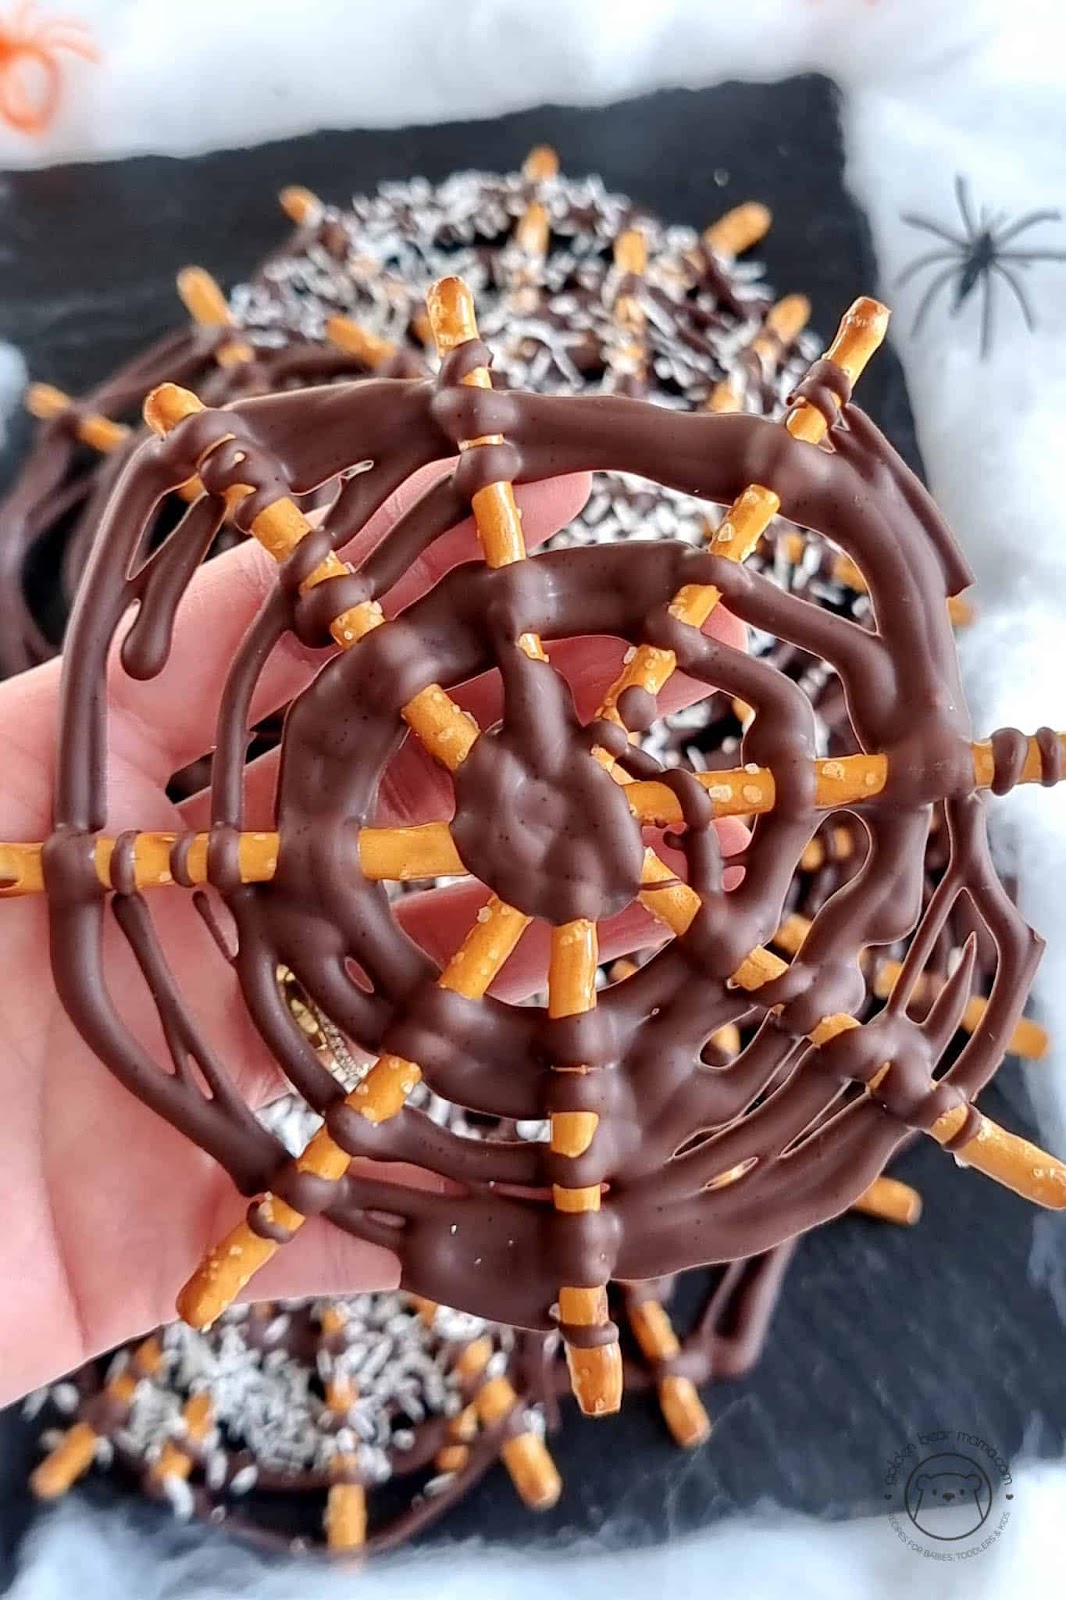 Chocolate spider webs - healthy Halloween treats - made with melted chocolate and pretzels - shown with a hand holding one up.